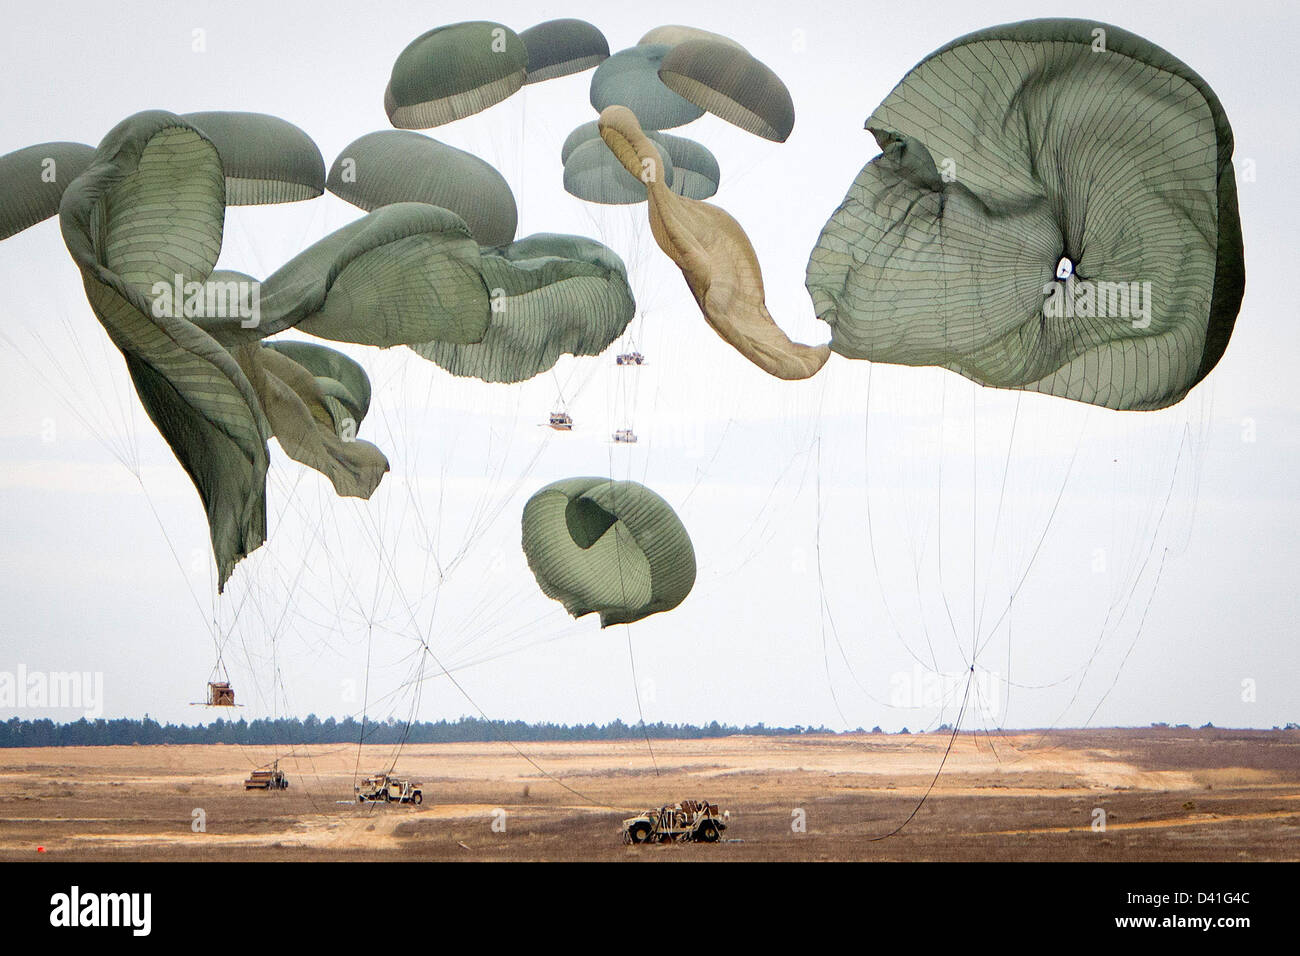 Parachute canopies cover the sky during a US Air Force heavy equipment airdrop exercise February 25, 2013 at Fort Bragg, NC. Stock Photo